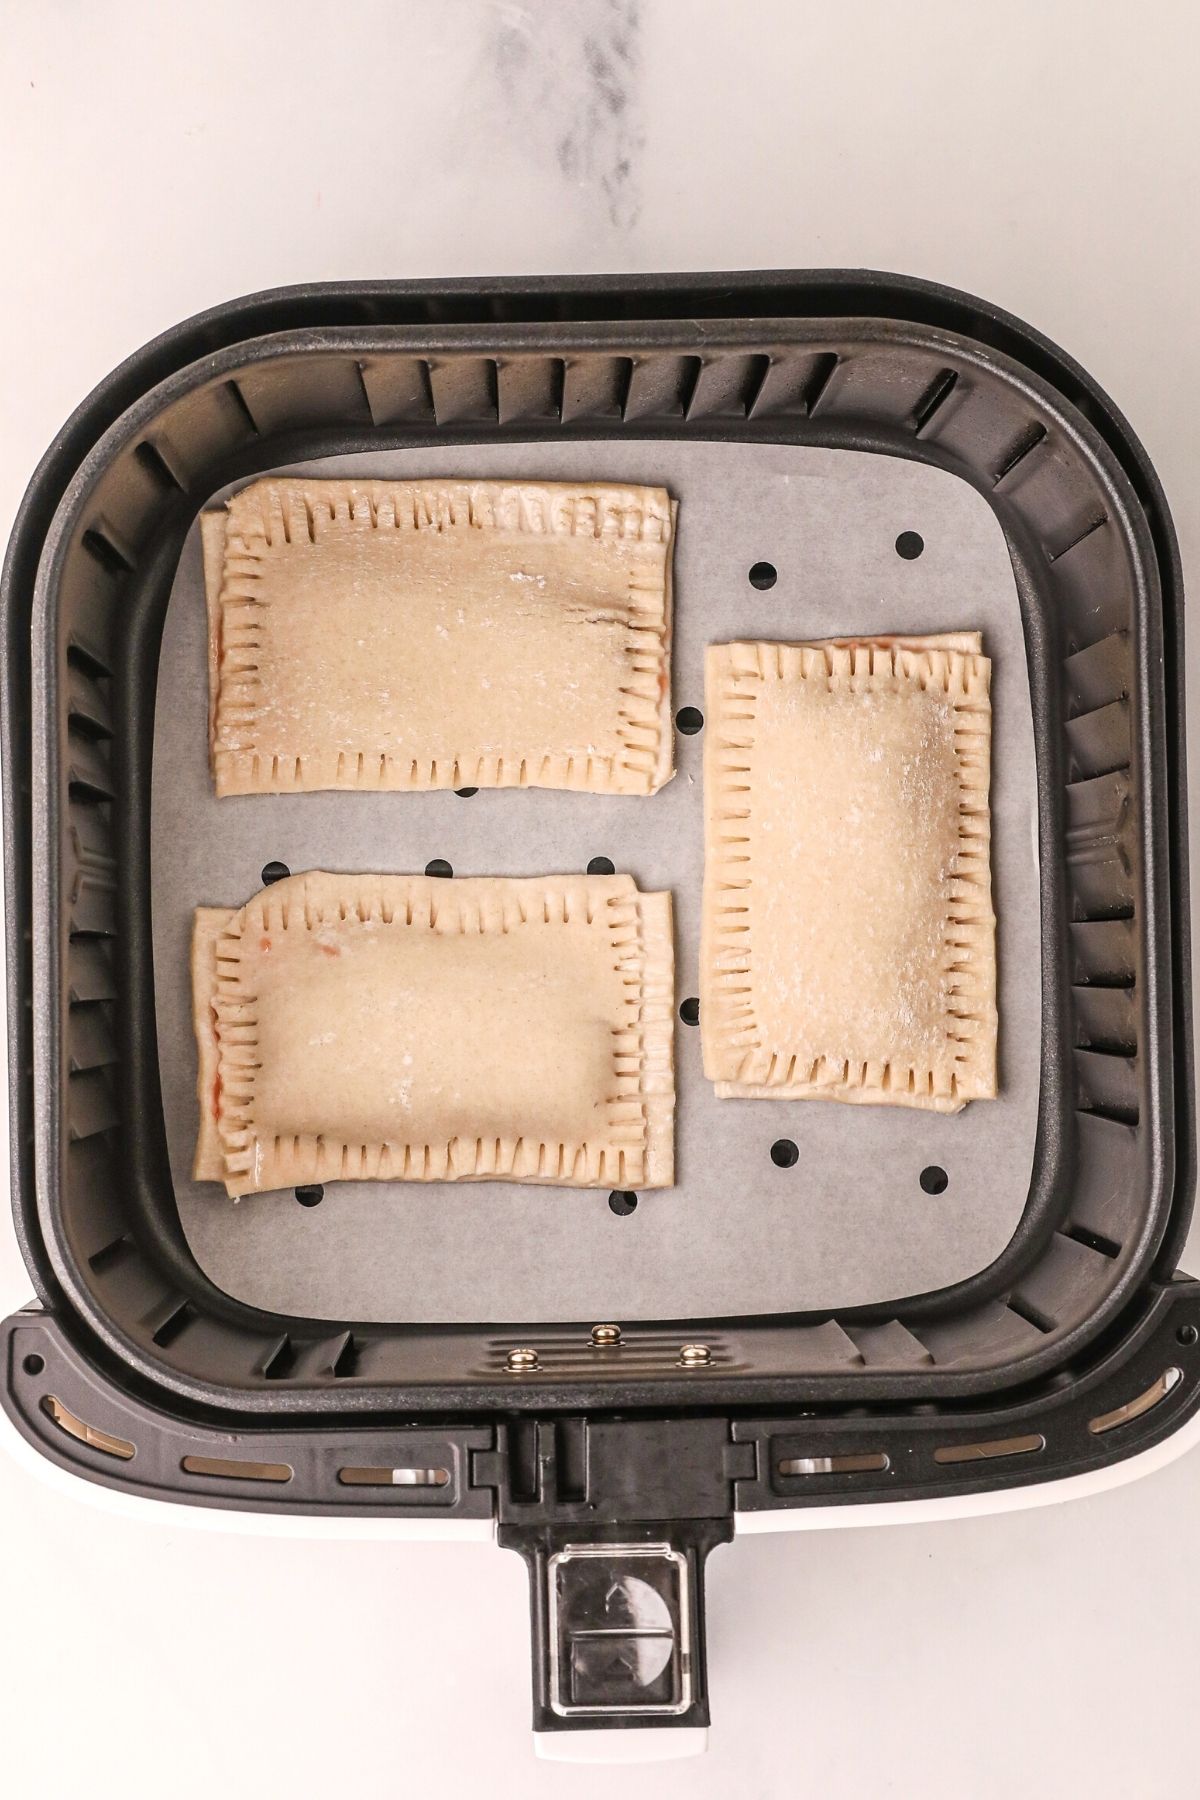 uncooked pop tarts in the air fryer basket, lined with parchment paper